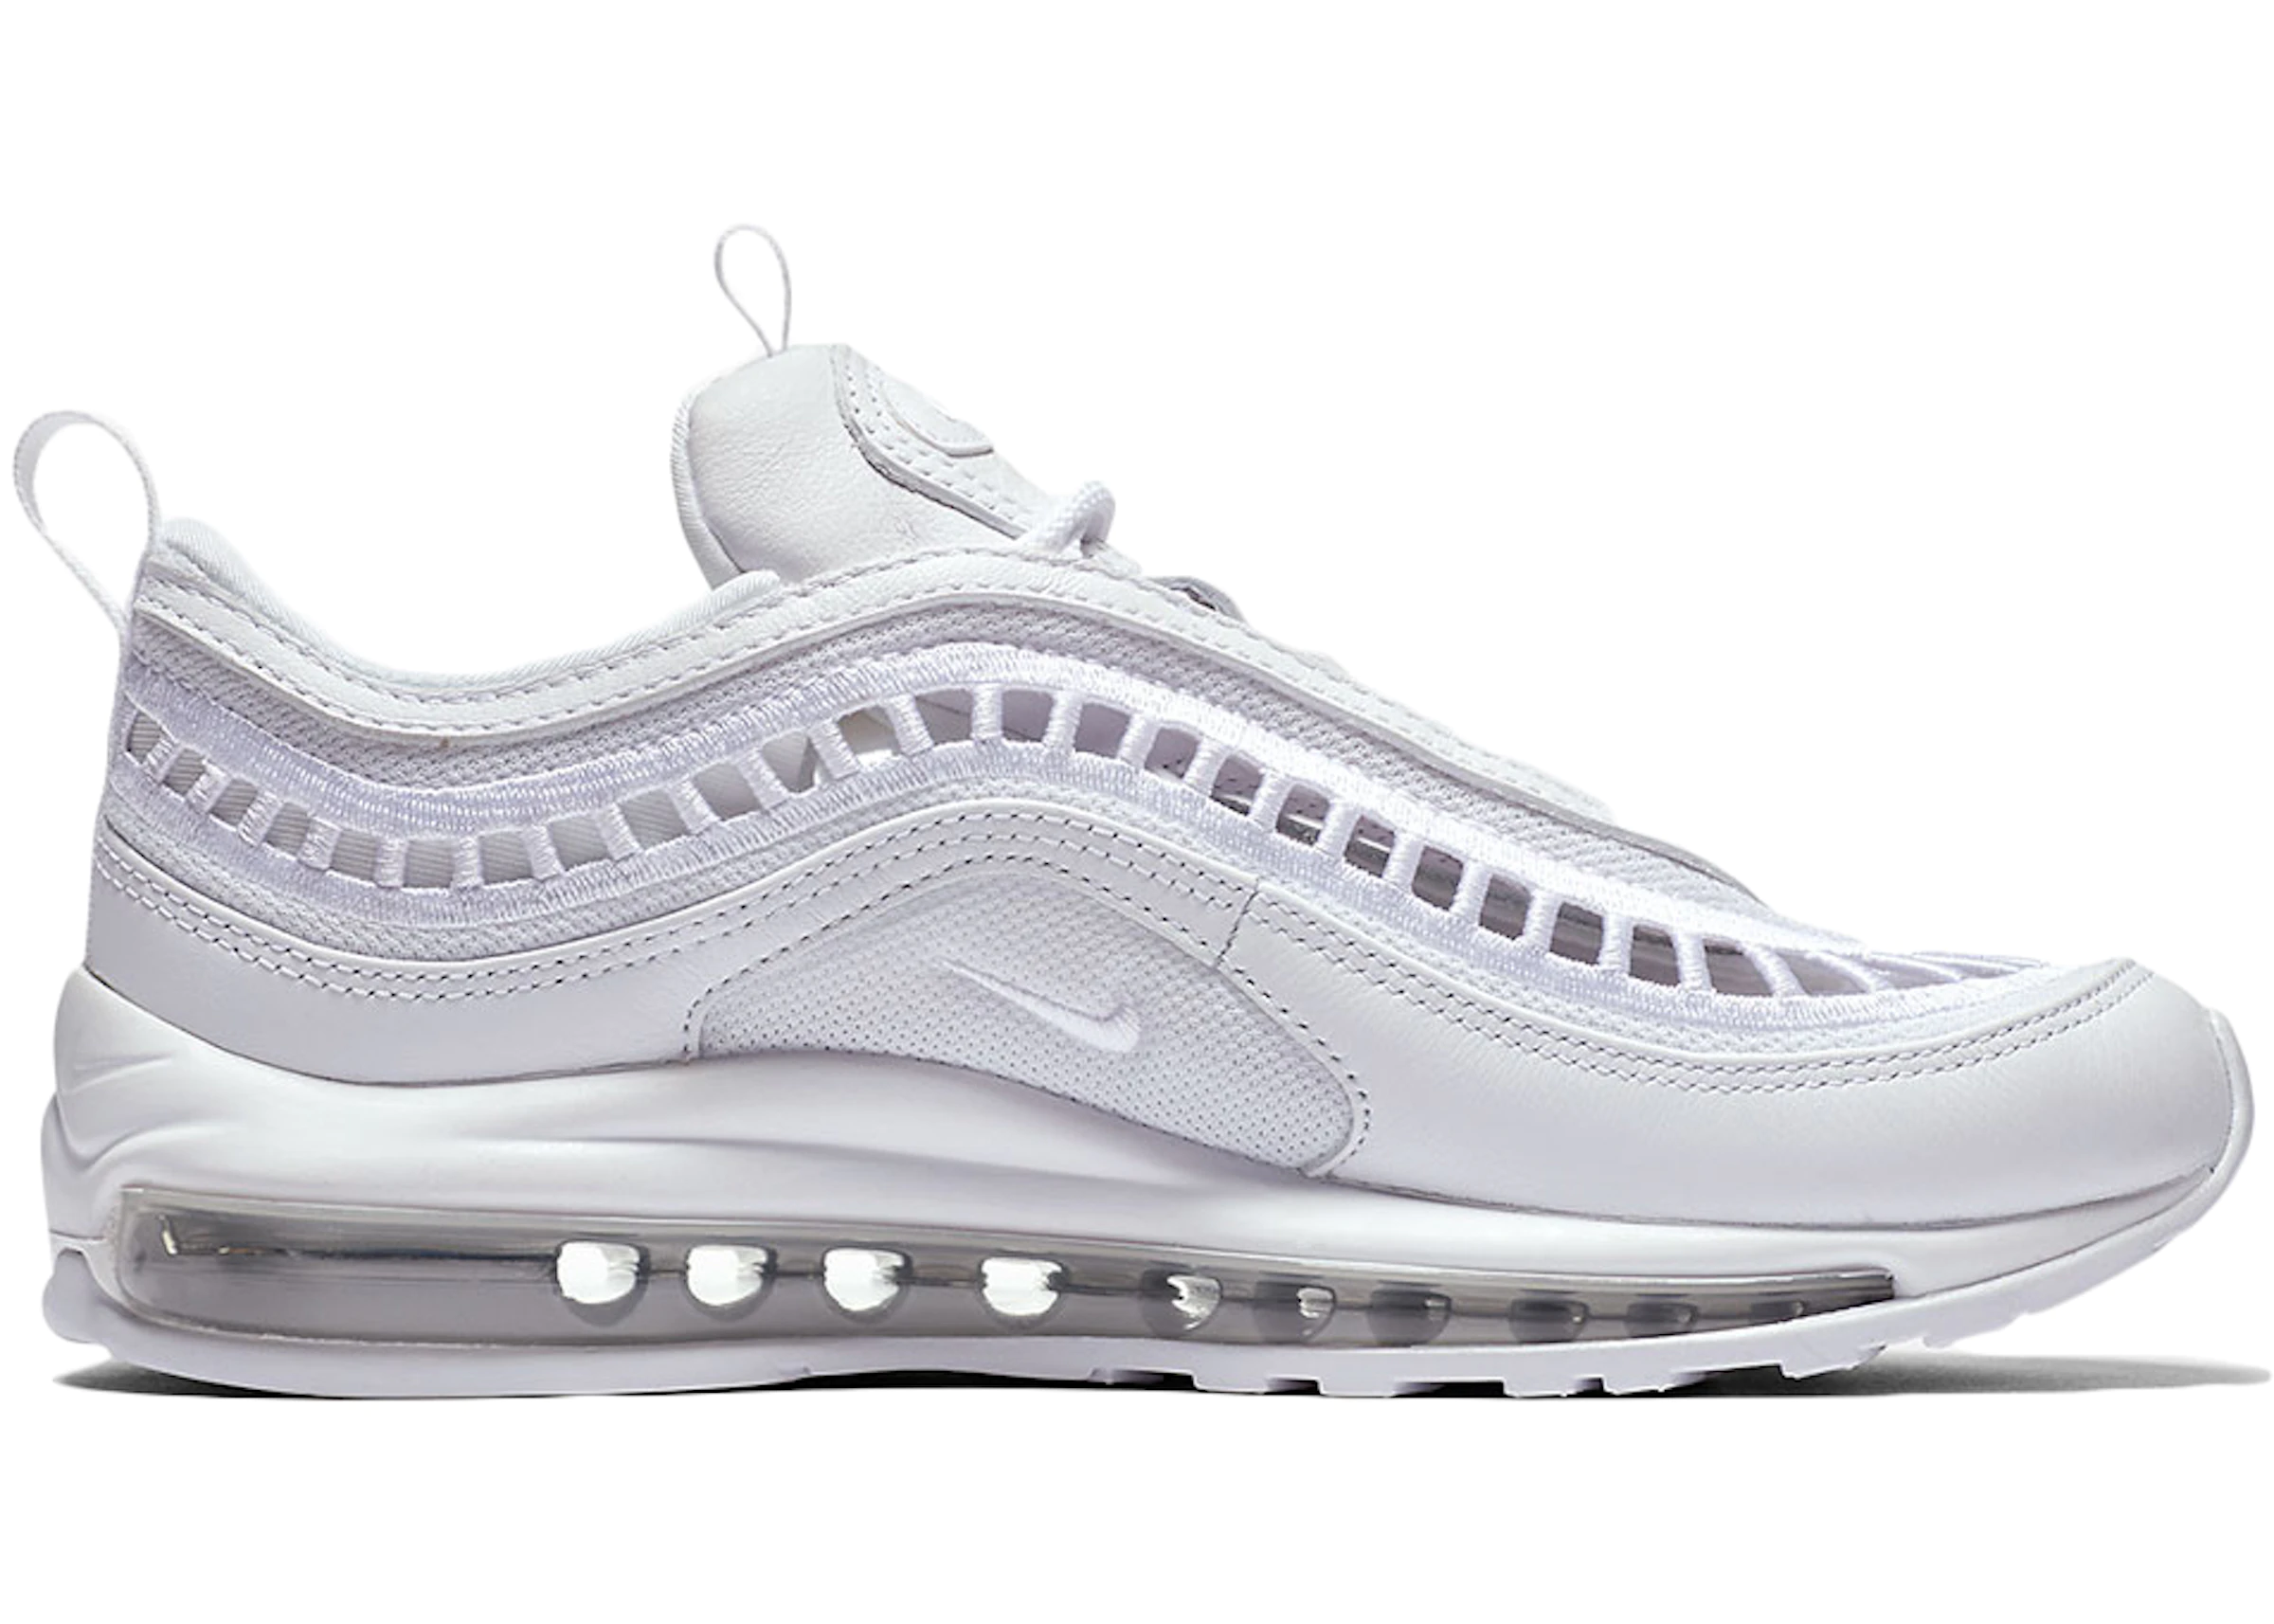 Stereotype Haan Prematuur Nike Air Max 97 Ultra 17' (W) - AO2326-100 - US